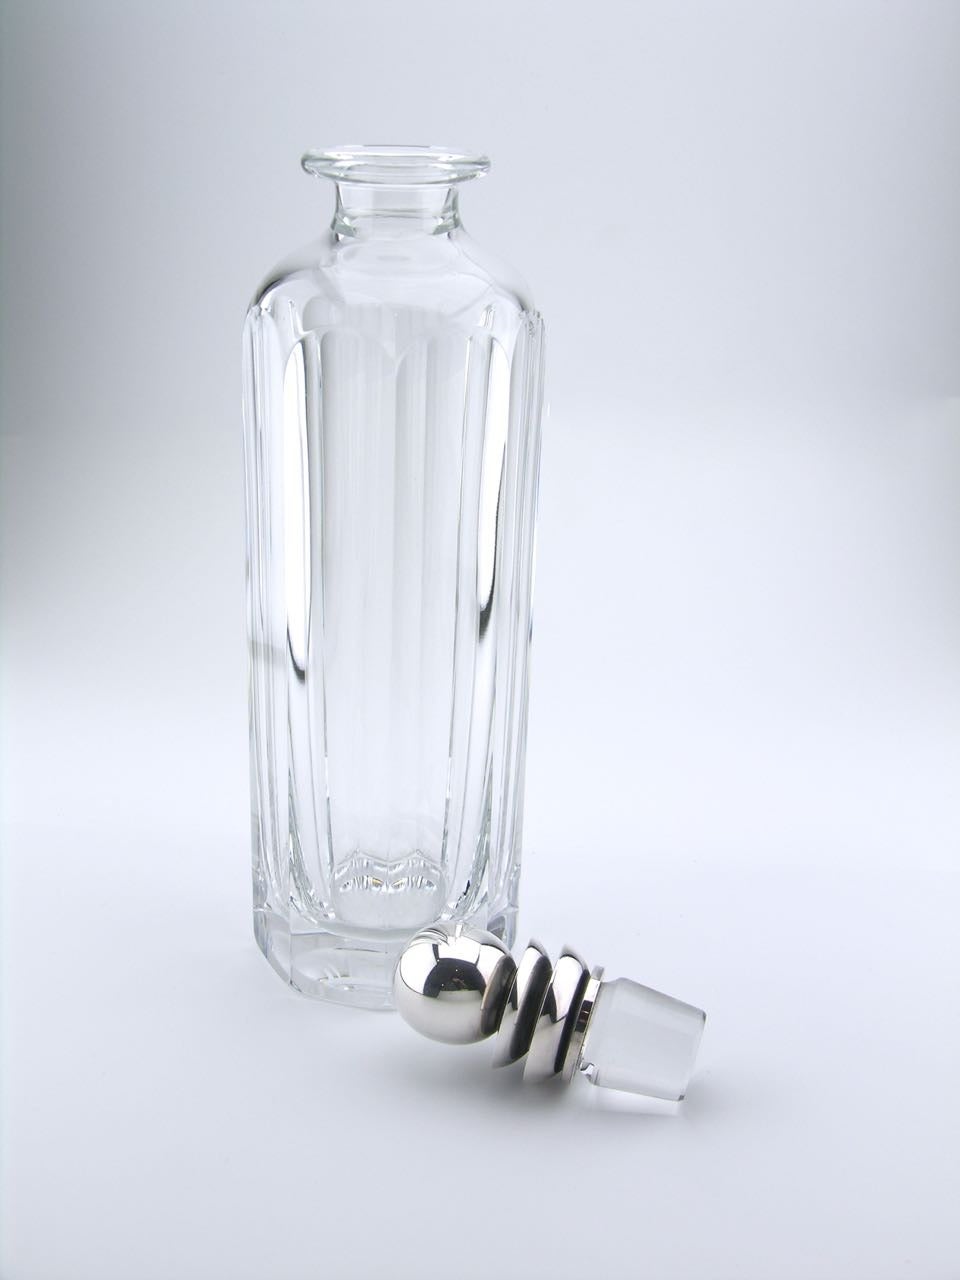 A rare example of a Georg Jensen decanter with a pyramid design stopper. The tall elongated decanter combines a simple facetted crystal body with a silver cased crystal stopper. 

The pyramid pattern of a combination of three raised tiers